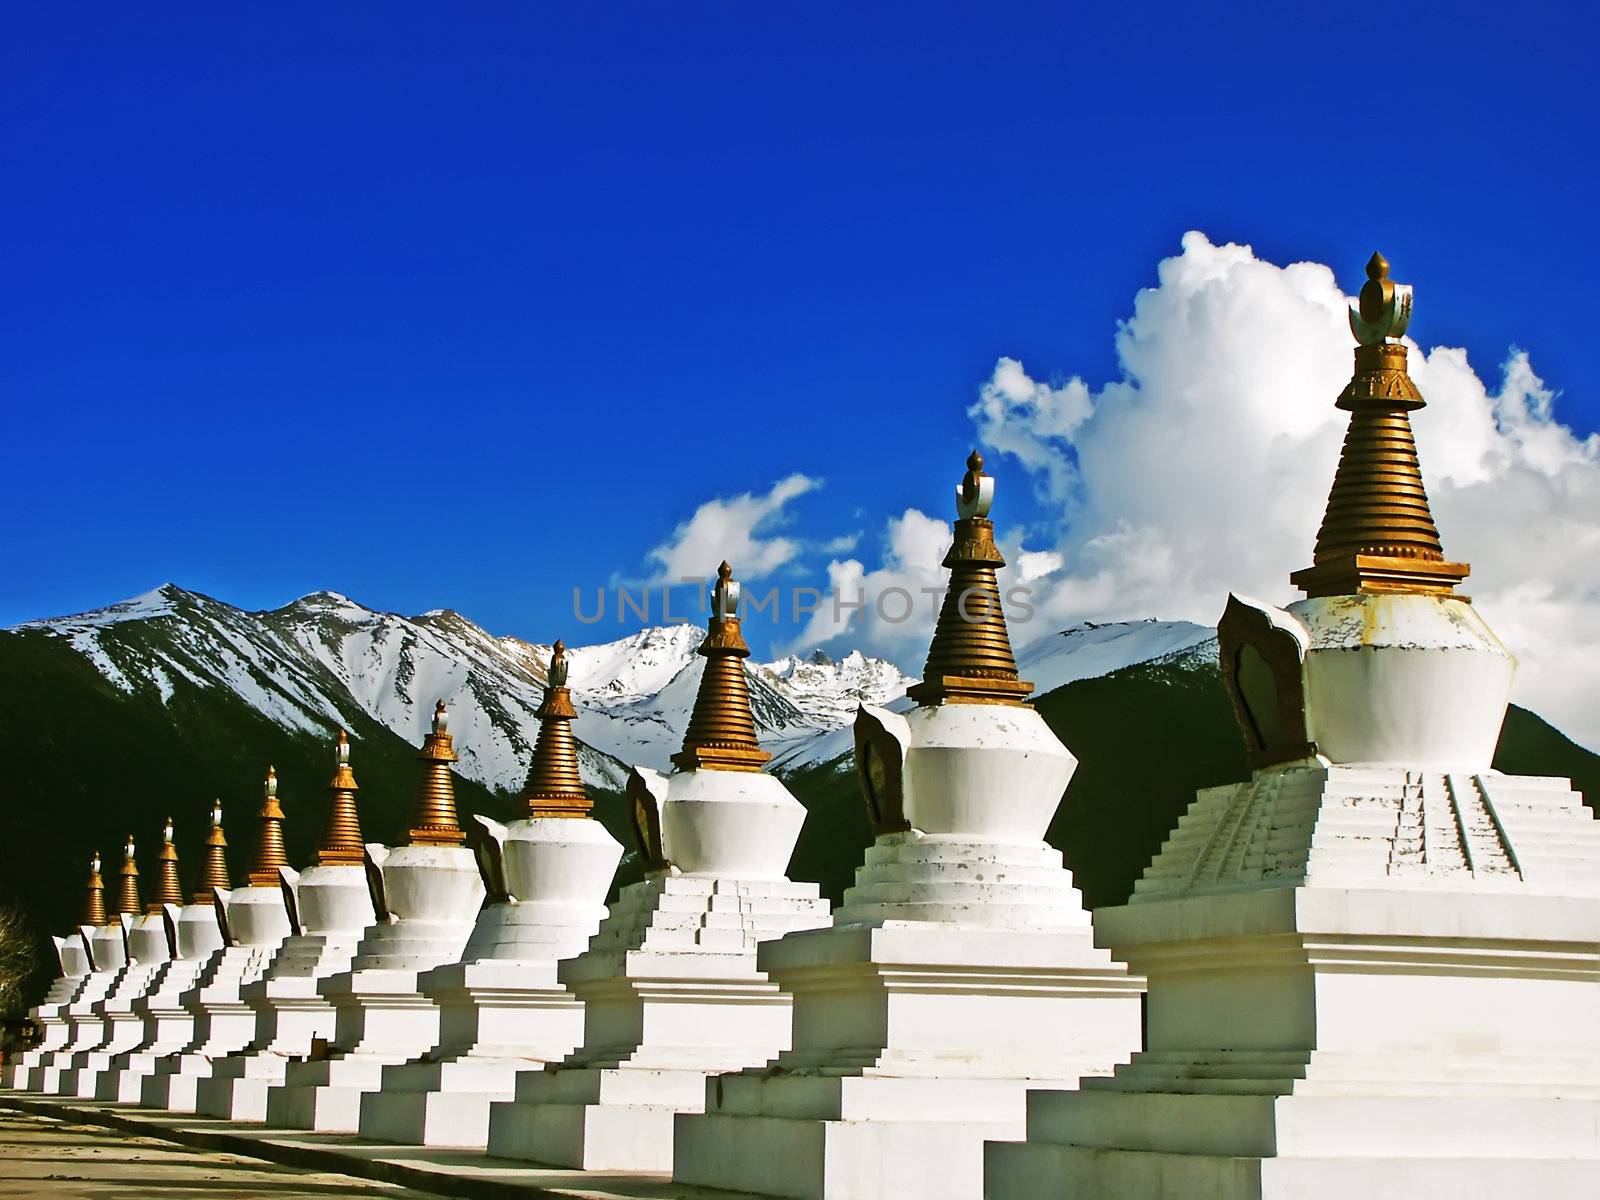 The White Buddhist pagoda group by xfdly5